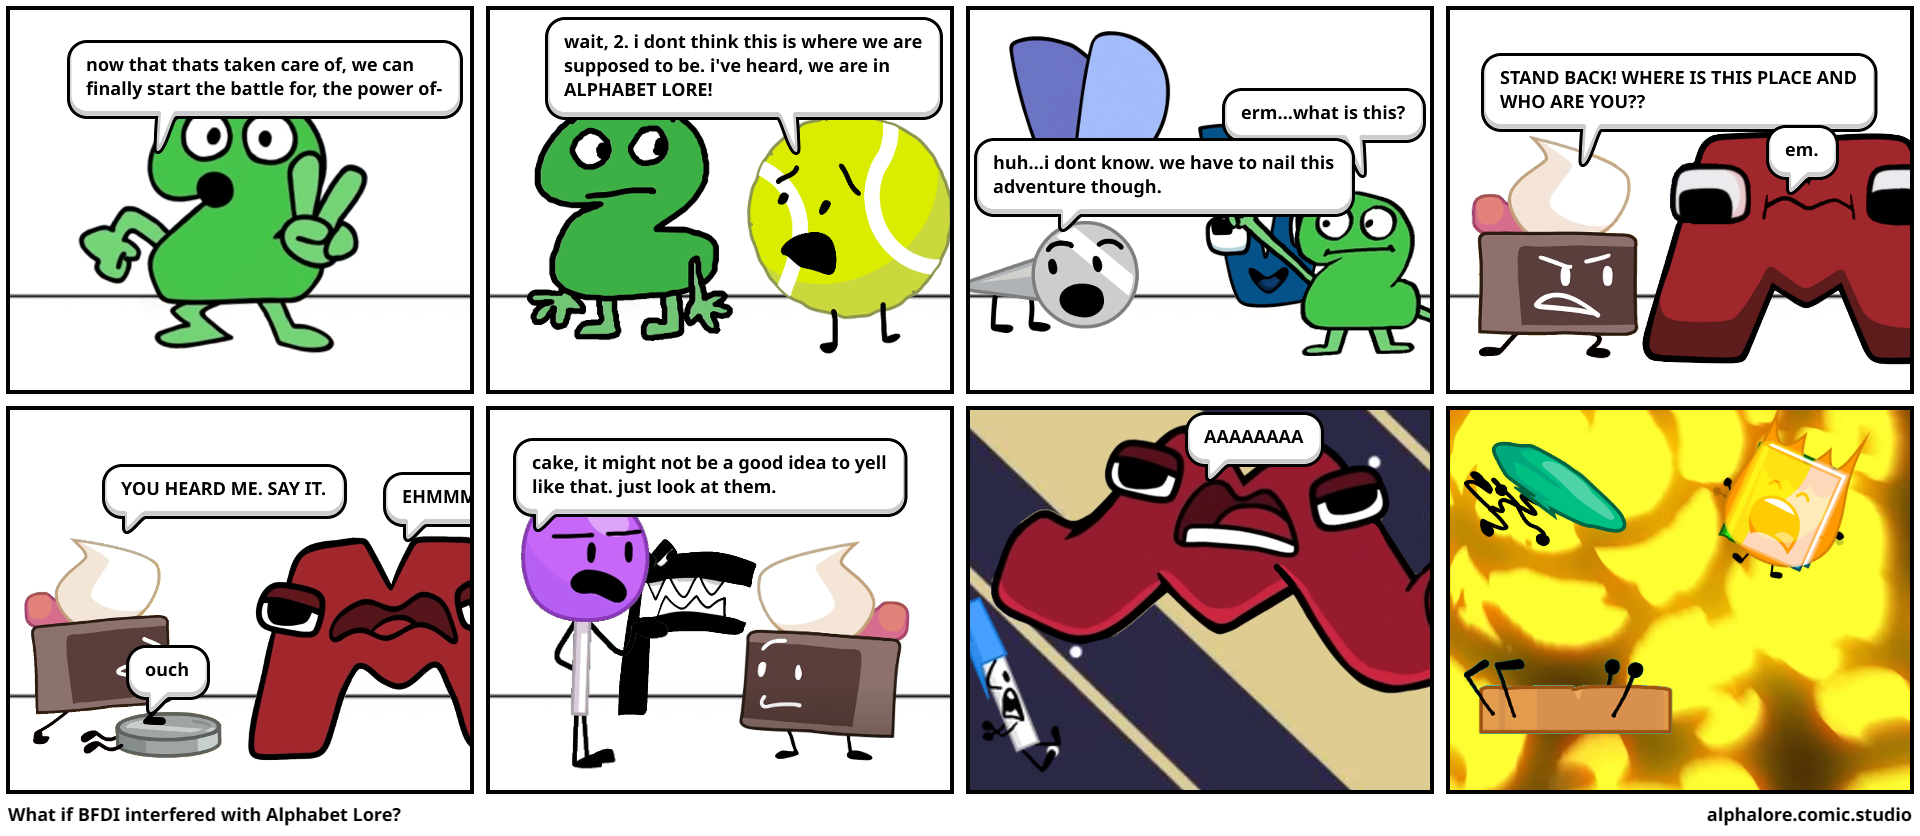 What if BFDI interfered with Alphabet Lore?